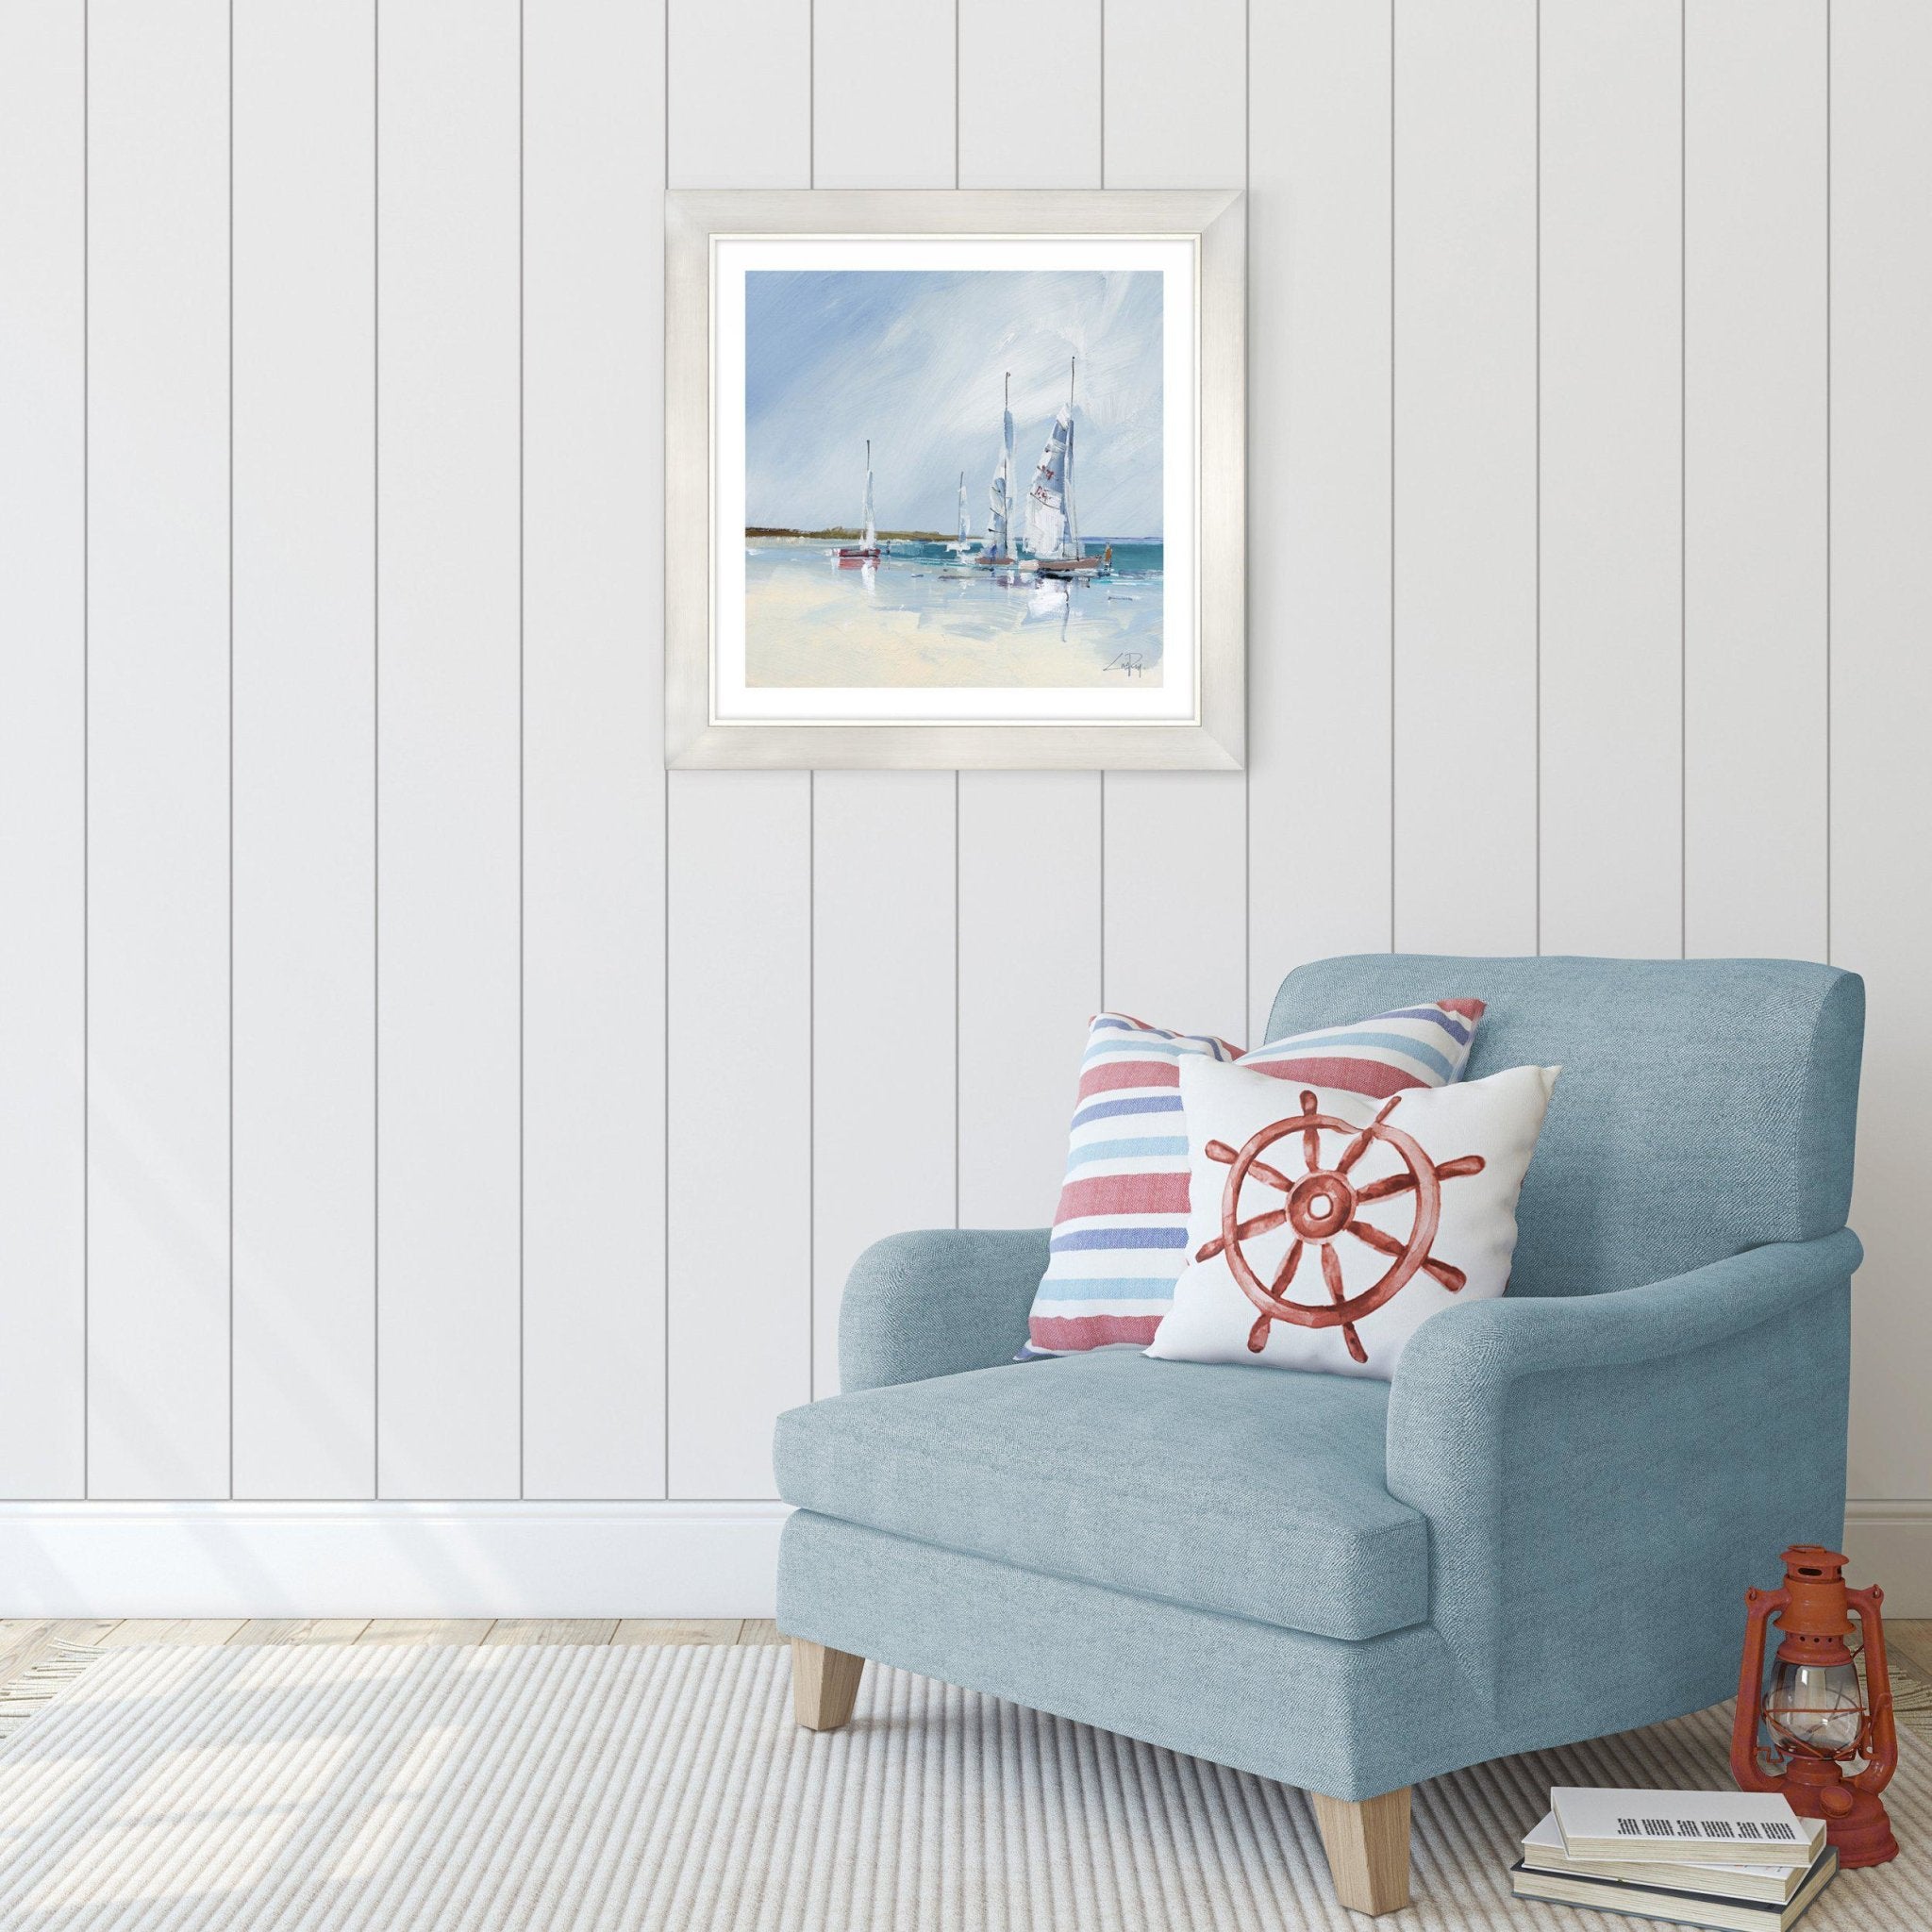 Setting Sail by Image Conscious - Duck Barn Interiors